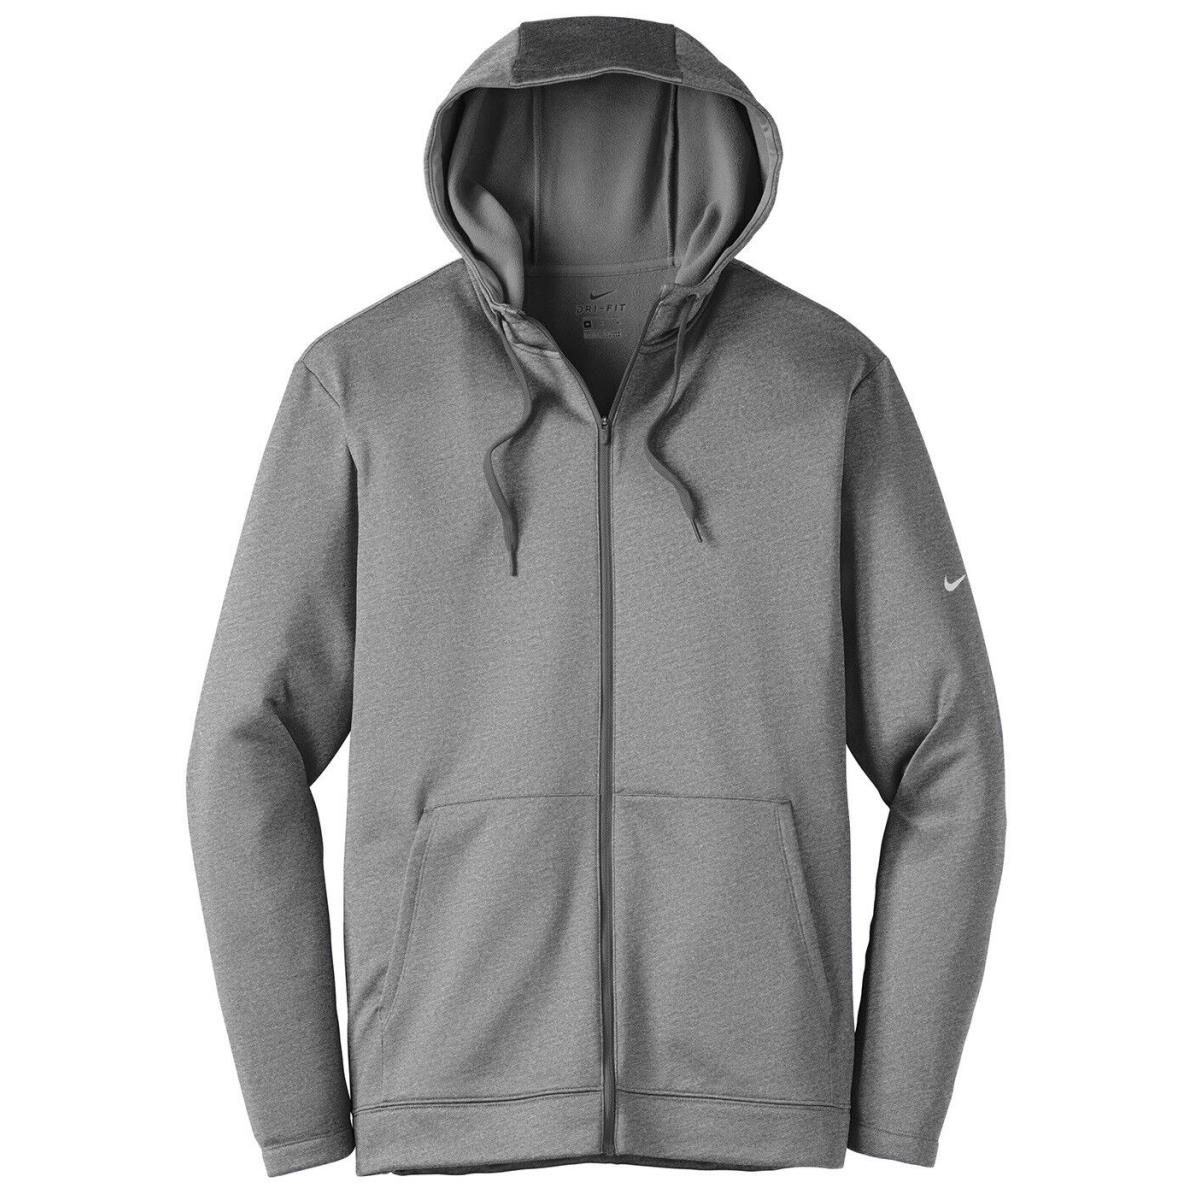 Men`s Nike Breathable Wicking Therma-fit Hoodie Zip UP Drawcords XS-4XL Dark Gray Heather